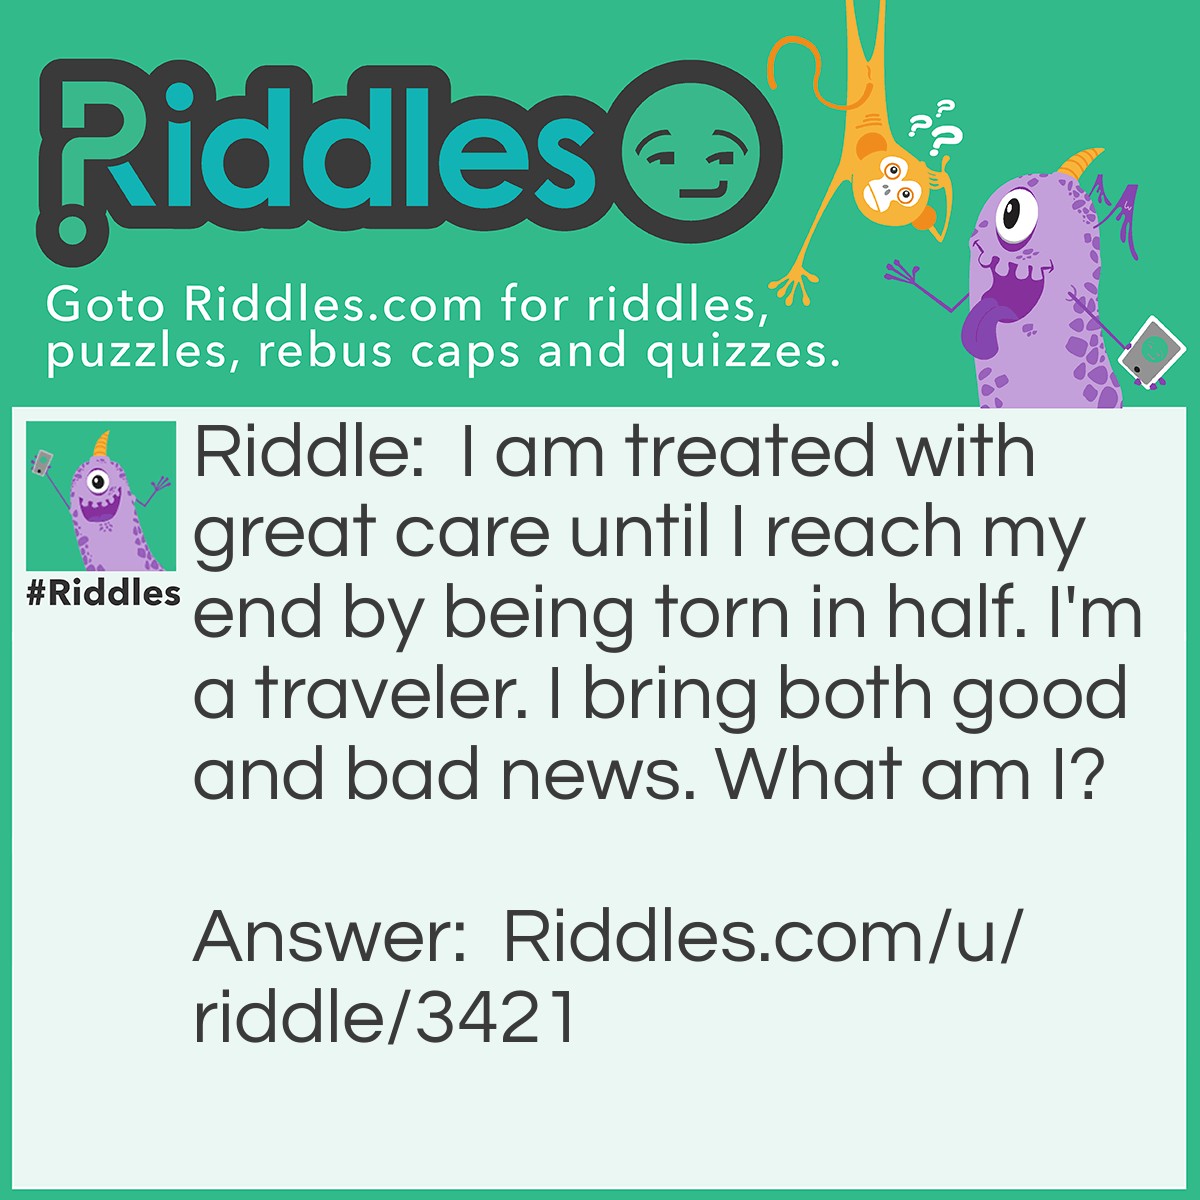 Riddle: I am treated with great care until I reach my end by being torn in half. I'm a traveler. I bring both good and bad news. What am I? Answer: An Envelope.